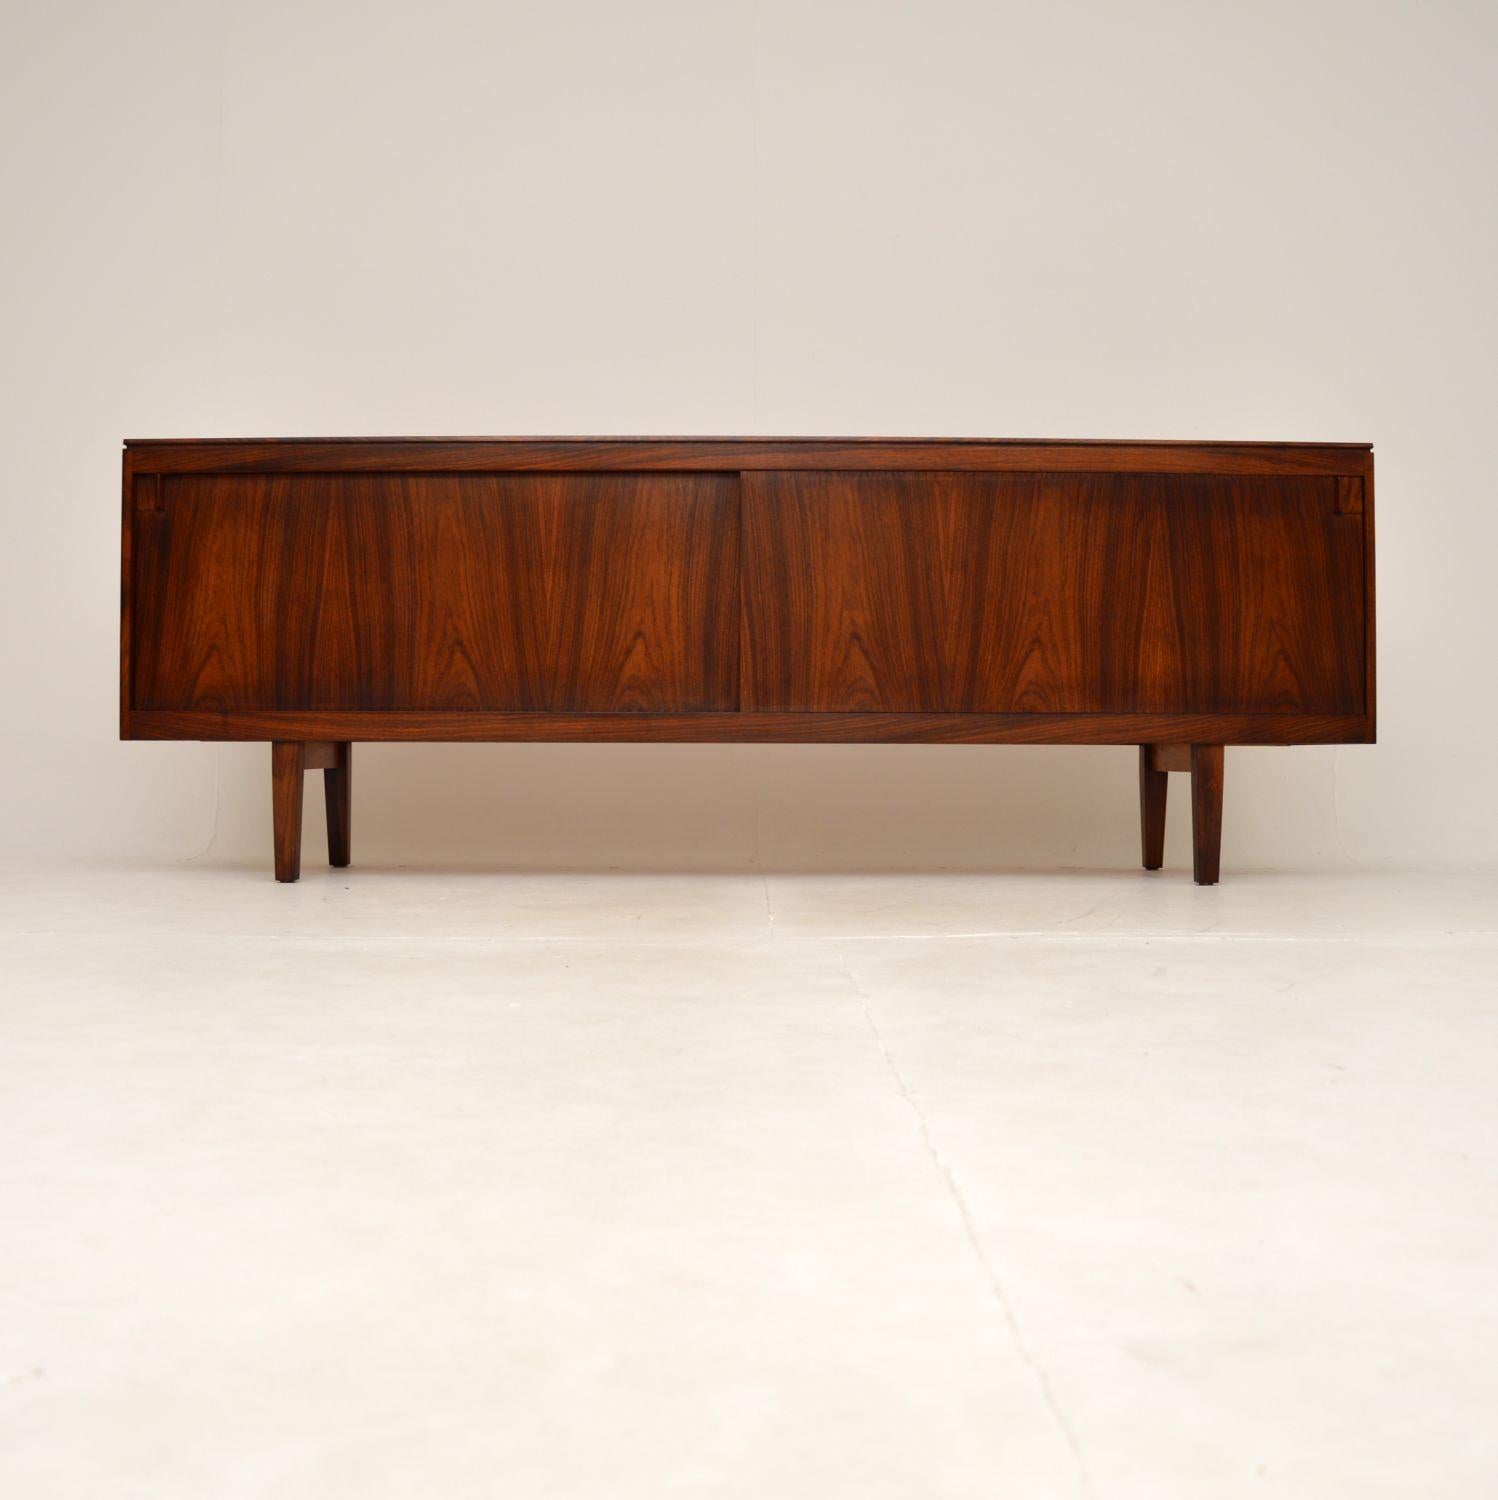 An absolutely stunning and extremely well made Danish vintage sideboard. We believe this was made in Denmark, it dates from the 1960’s.

The quality is outstanding, this is a great size and has lots of lovely features. It is low and sleek, sitting